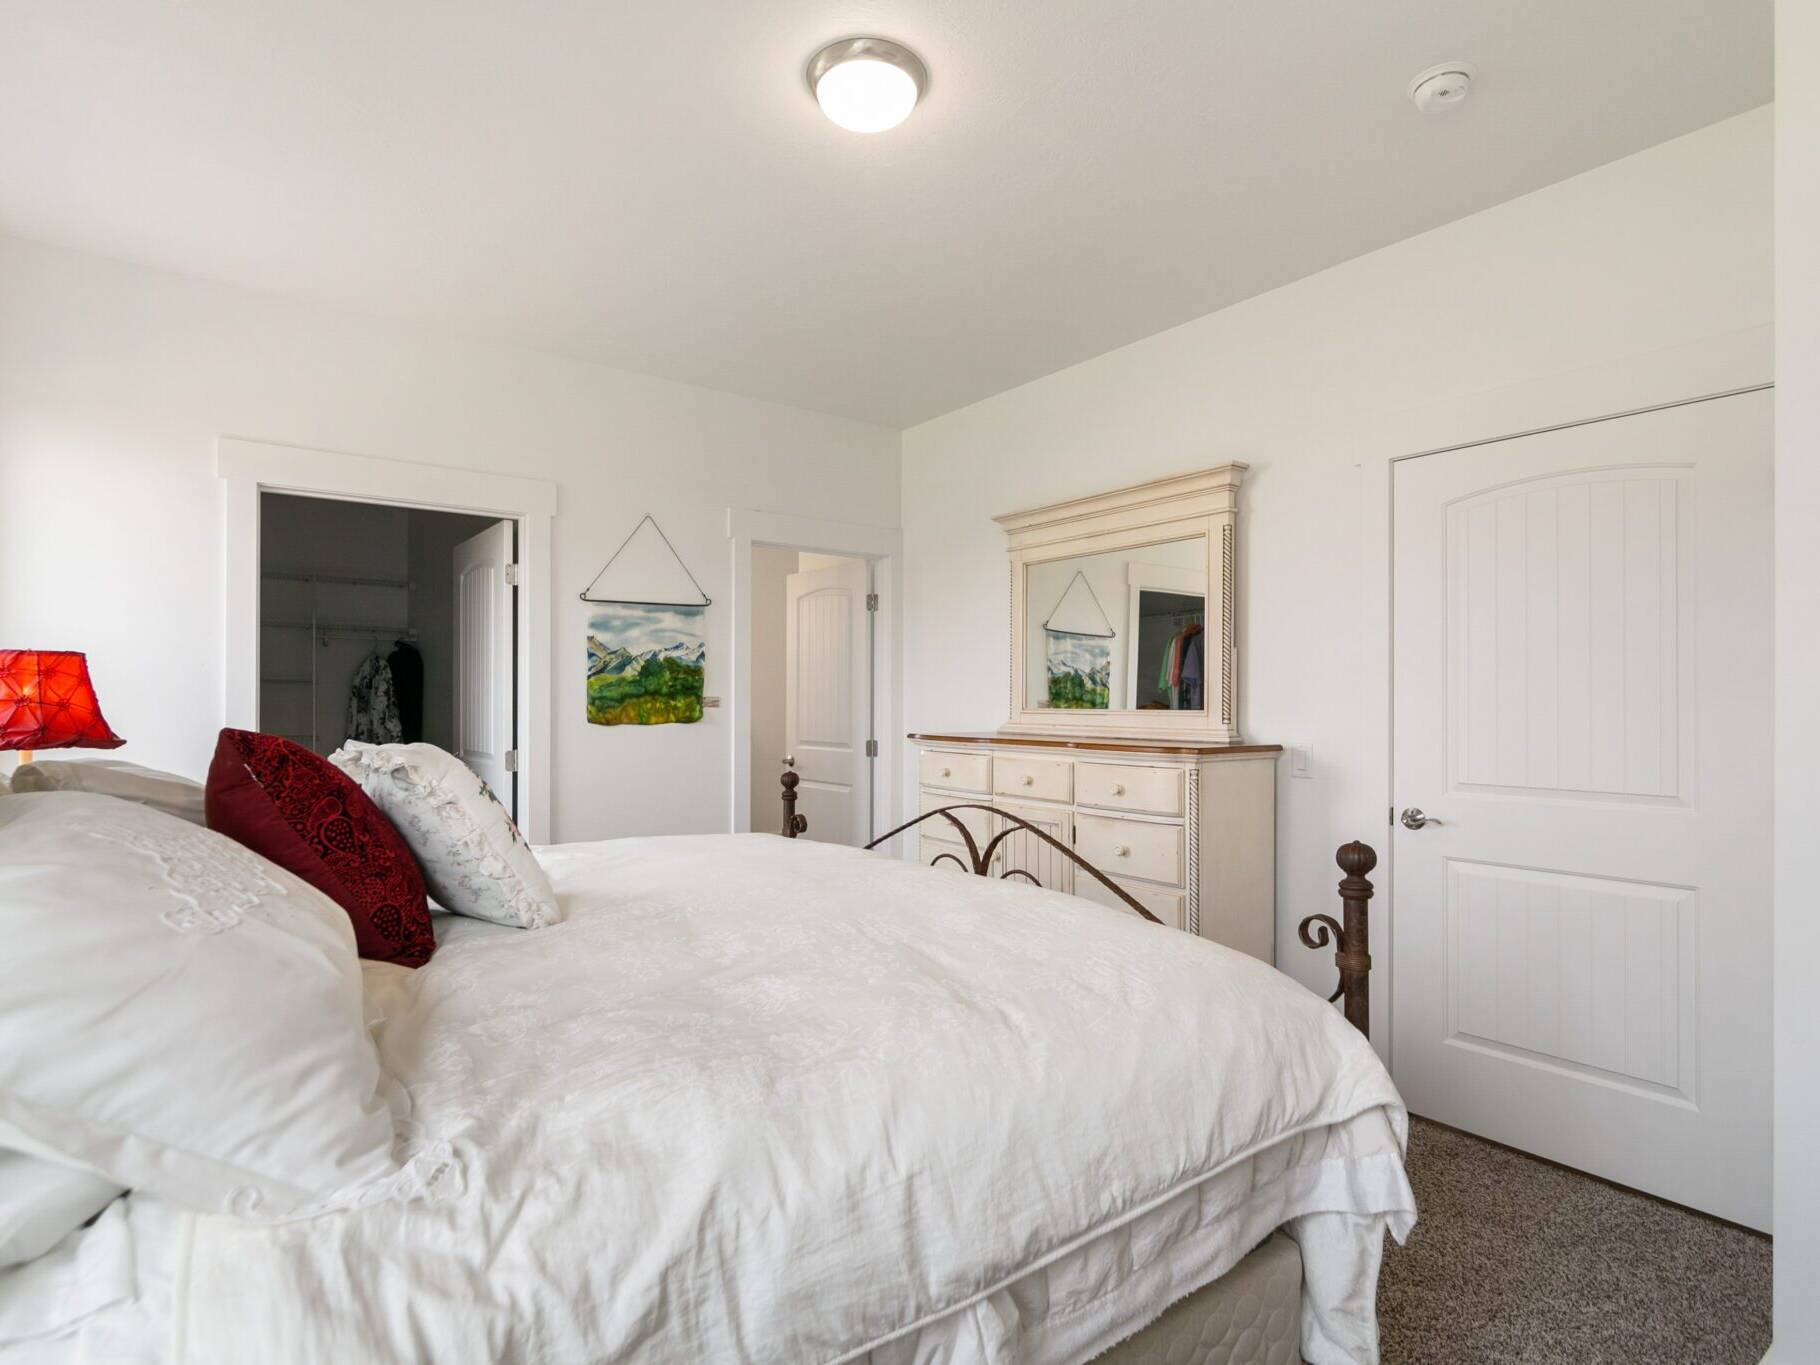 Master bedroom in The Seeley model home - Built by Big Sky Builder in Hamilton, MT